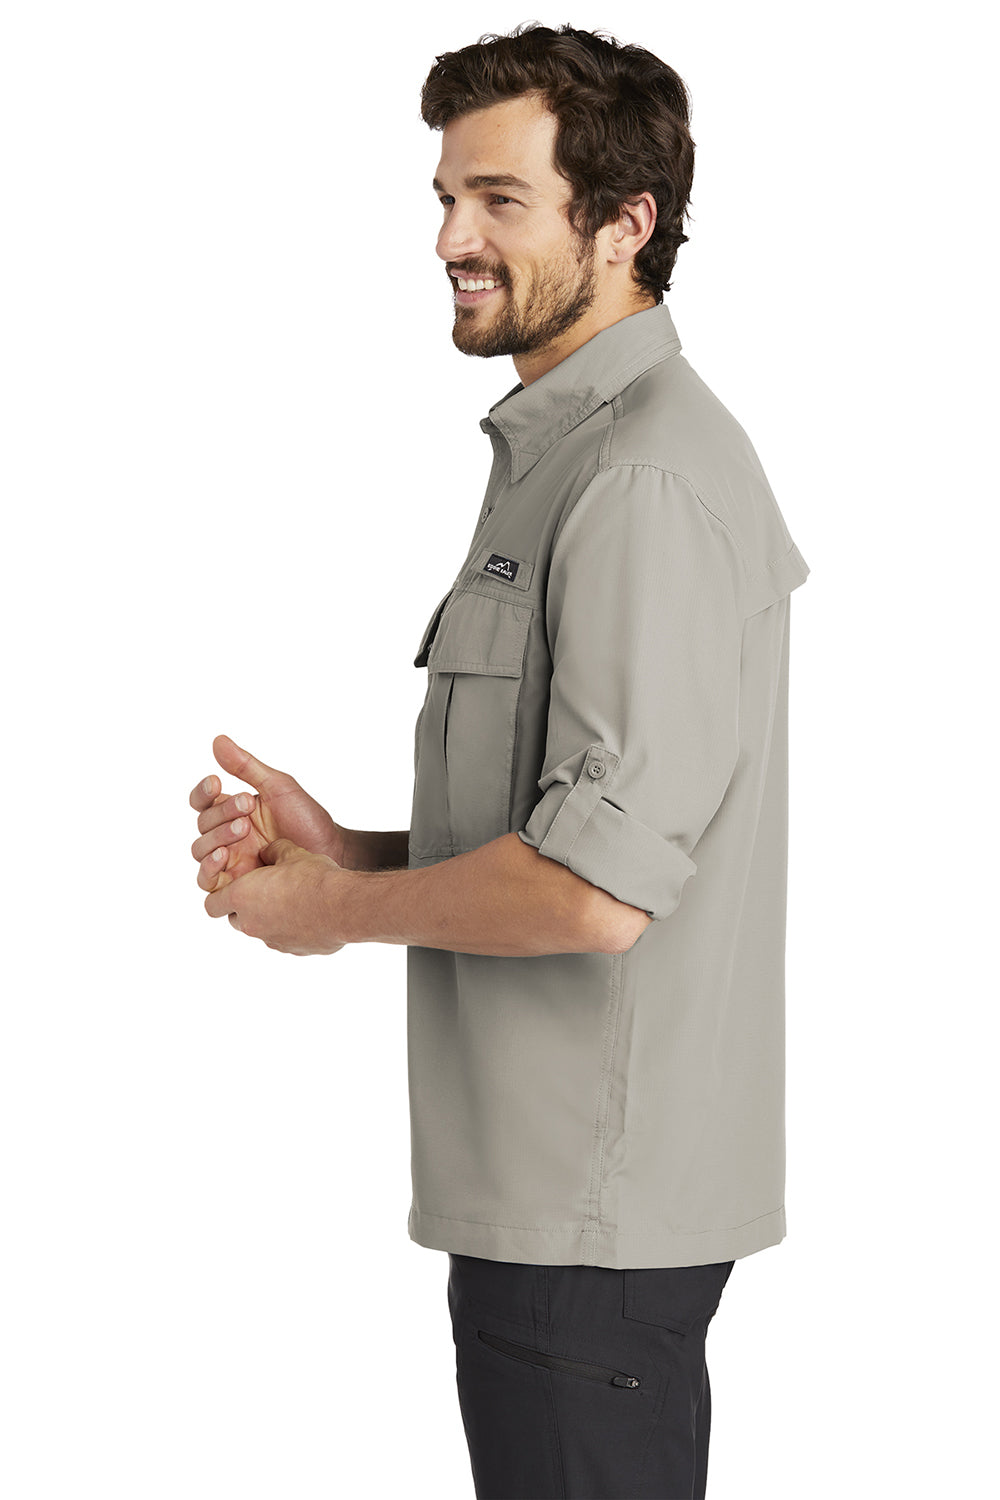 Eddie Bauer EB600 Mens Performance Fishing Moisture Wicking Long Sleeve Button Down Shirt w/ Double Pockets Driftwood Model Side